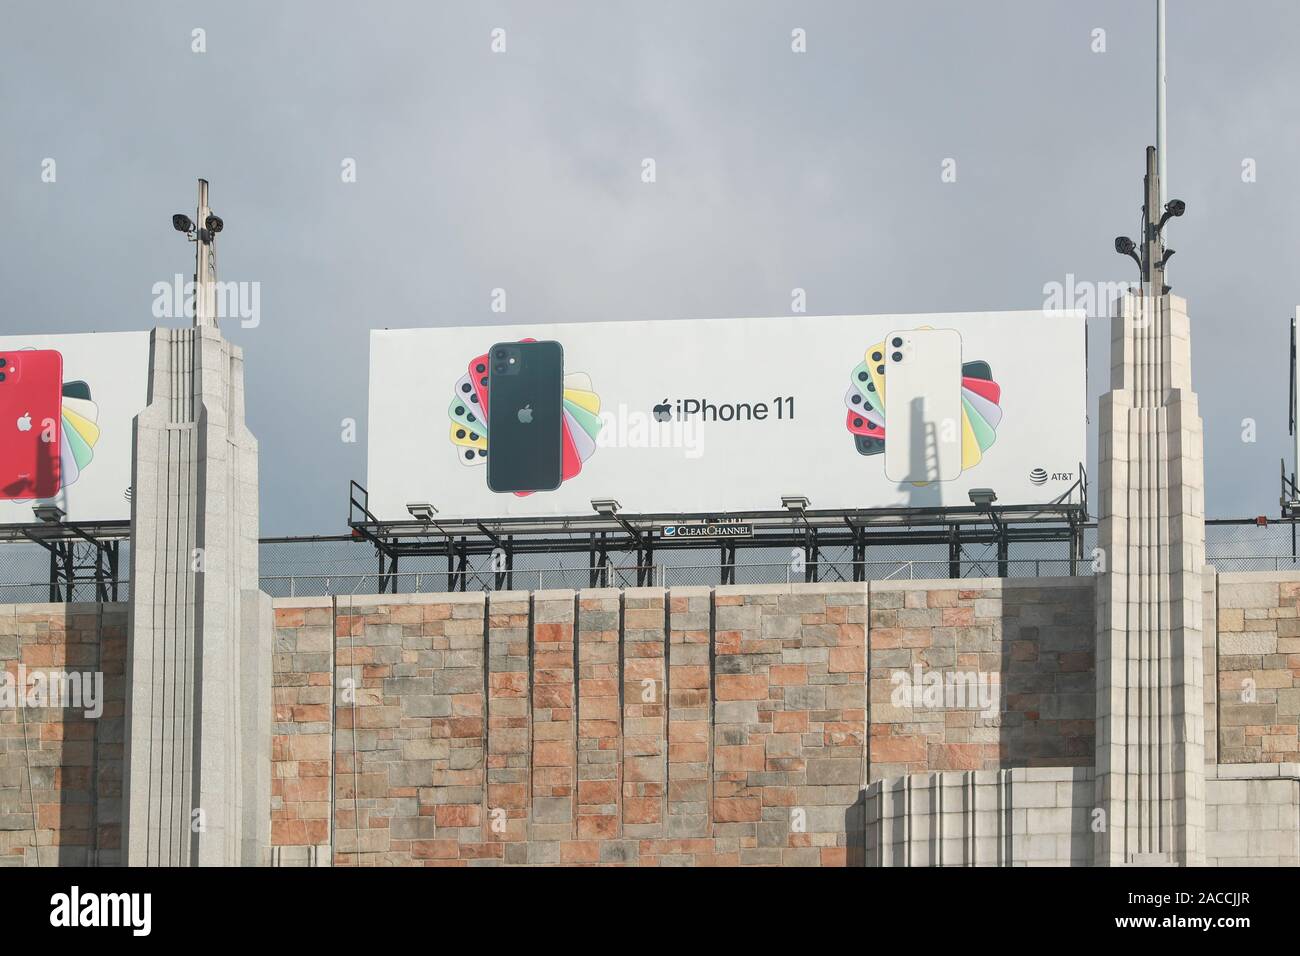 New York November 28 2019:A billboard advertising the iPhone 11 pro which on the Lincoln Tunnel - Image Stock Photo